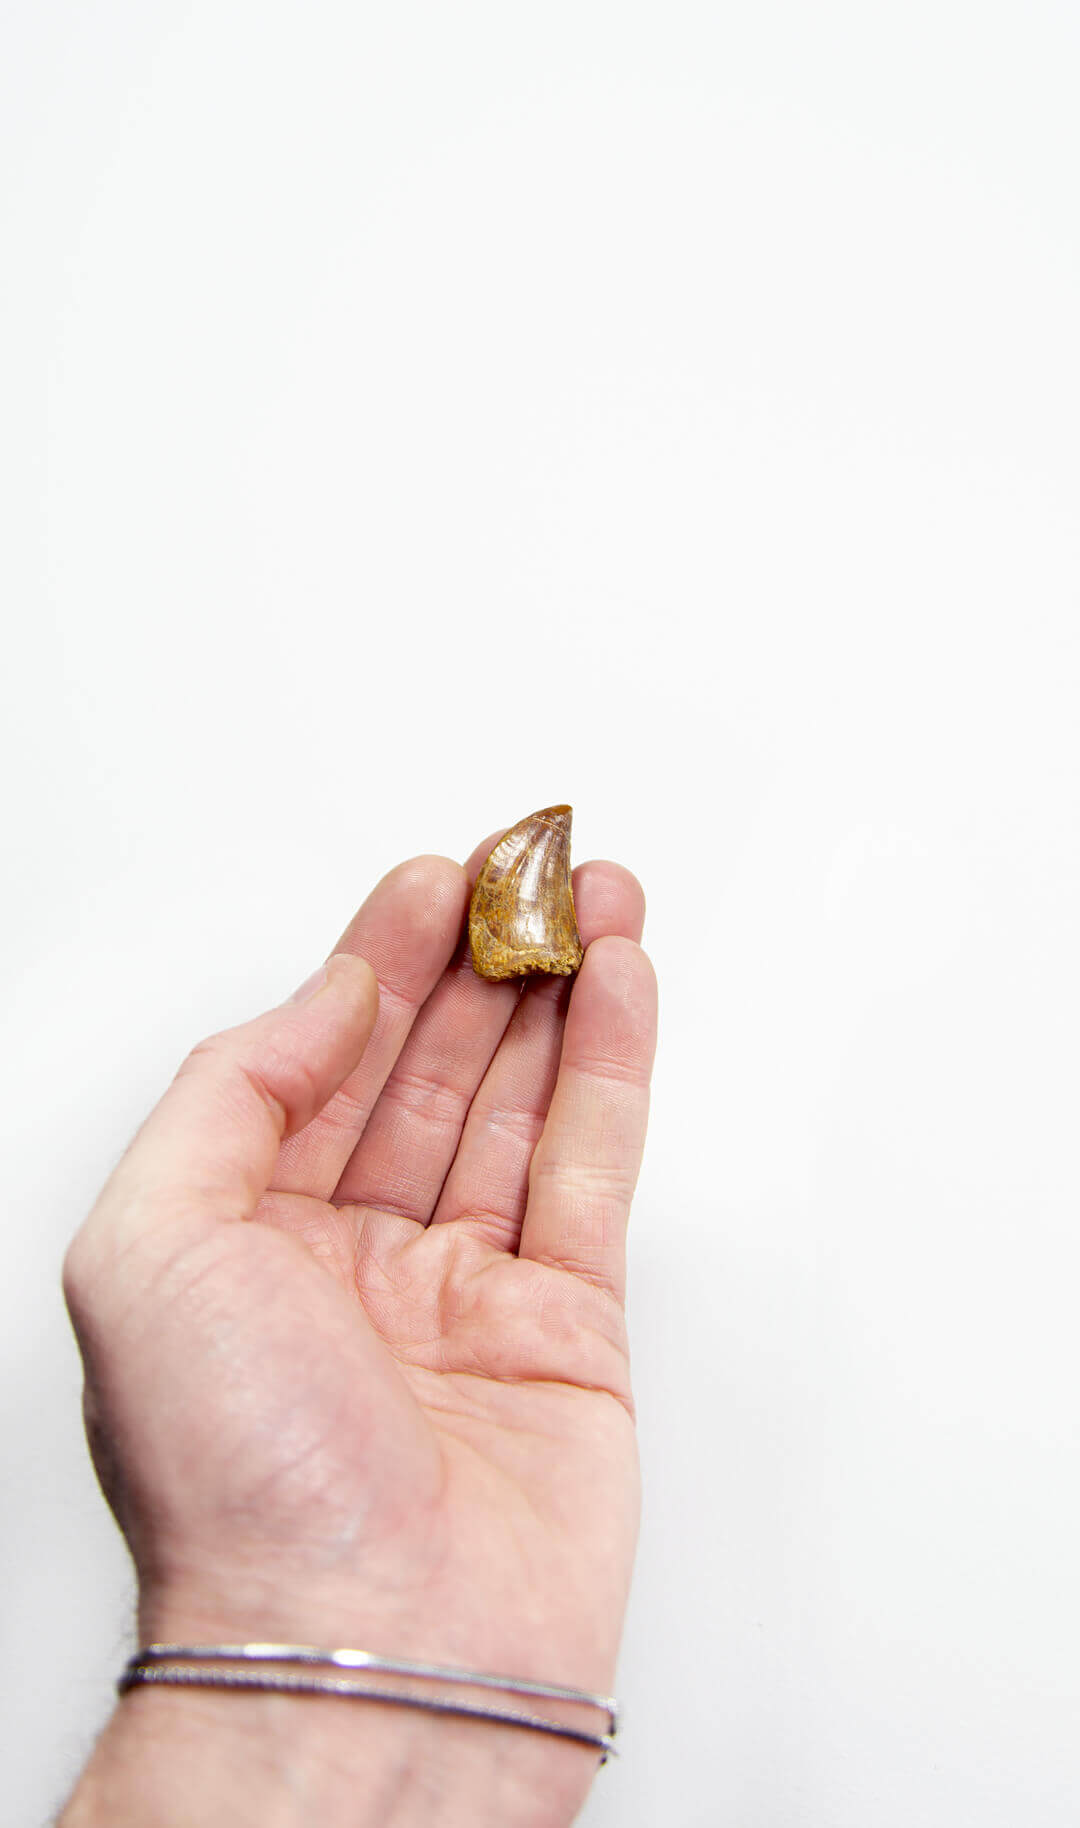 real fossil dinosaur carcharodontosaurus tooth for sale at the uk fossil store 24